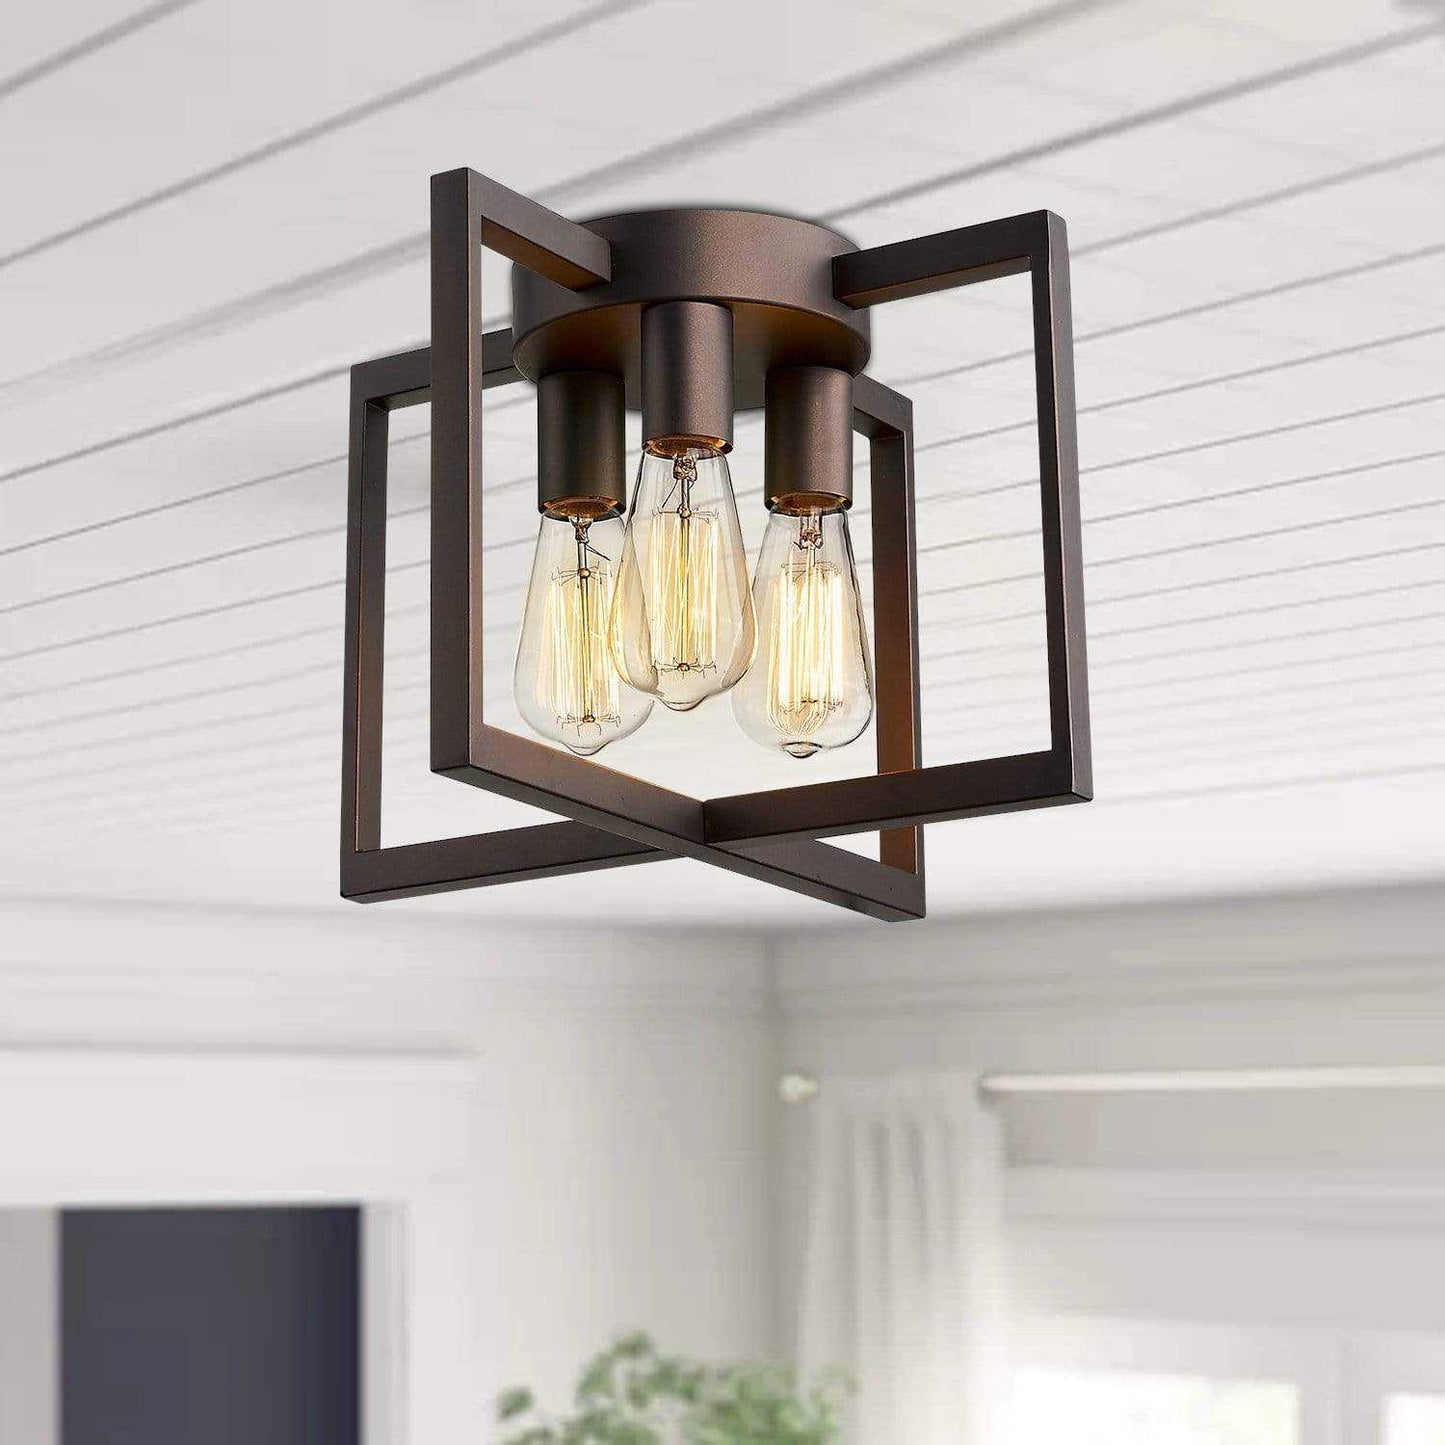 Emliviar Ceiling Light Fixture Industrial Semi-Flush Mount with Metal Cage,2A2-CL3 ORB